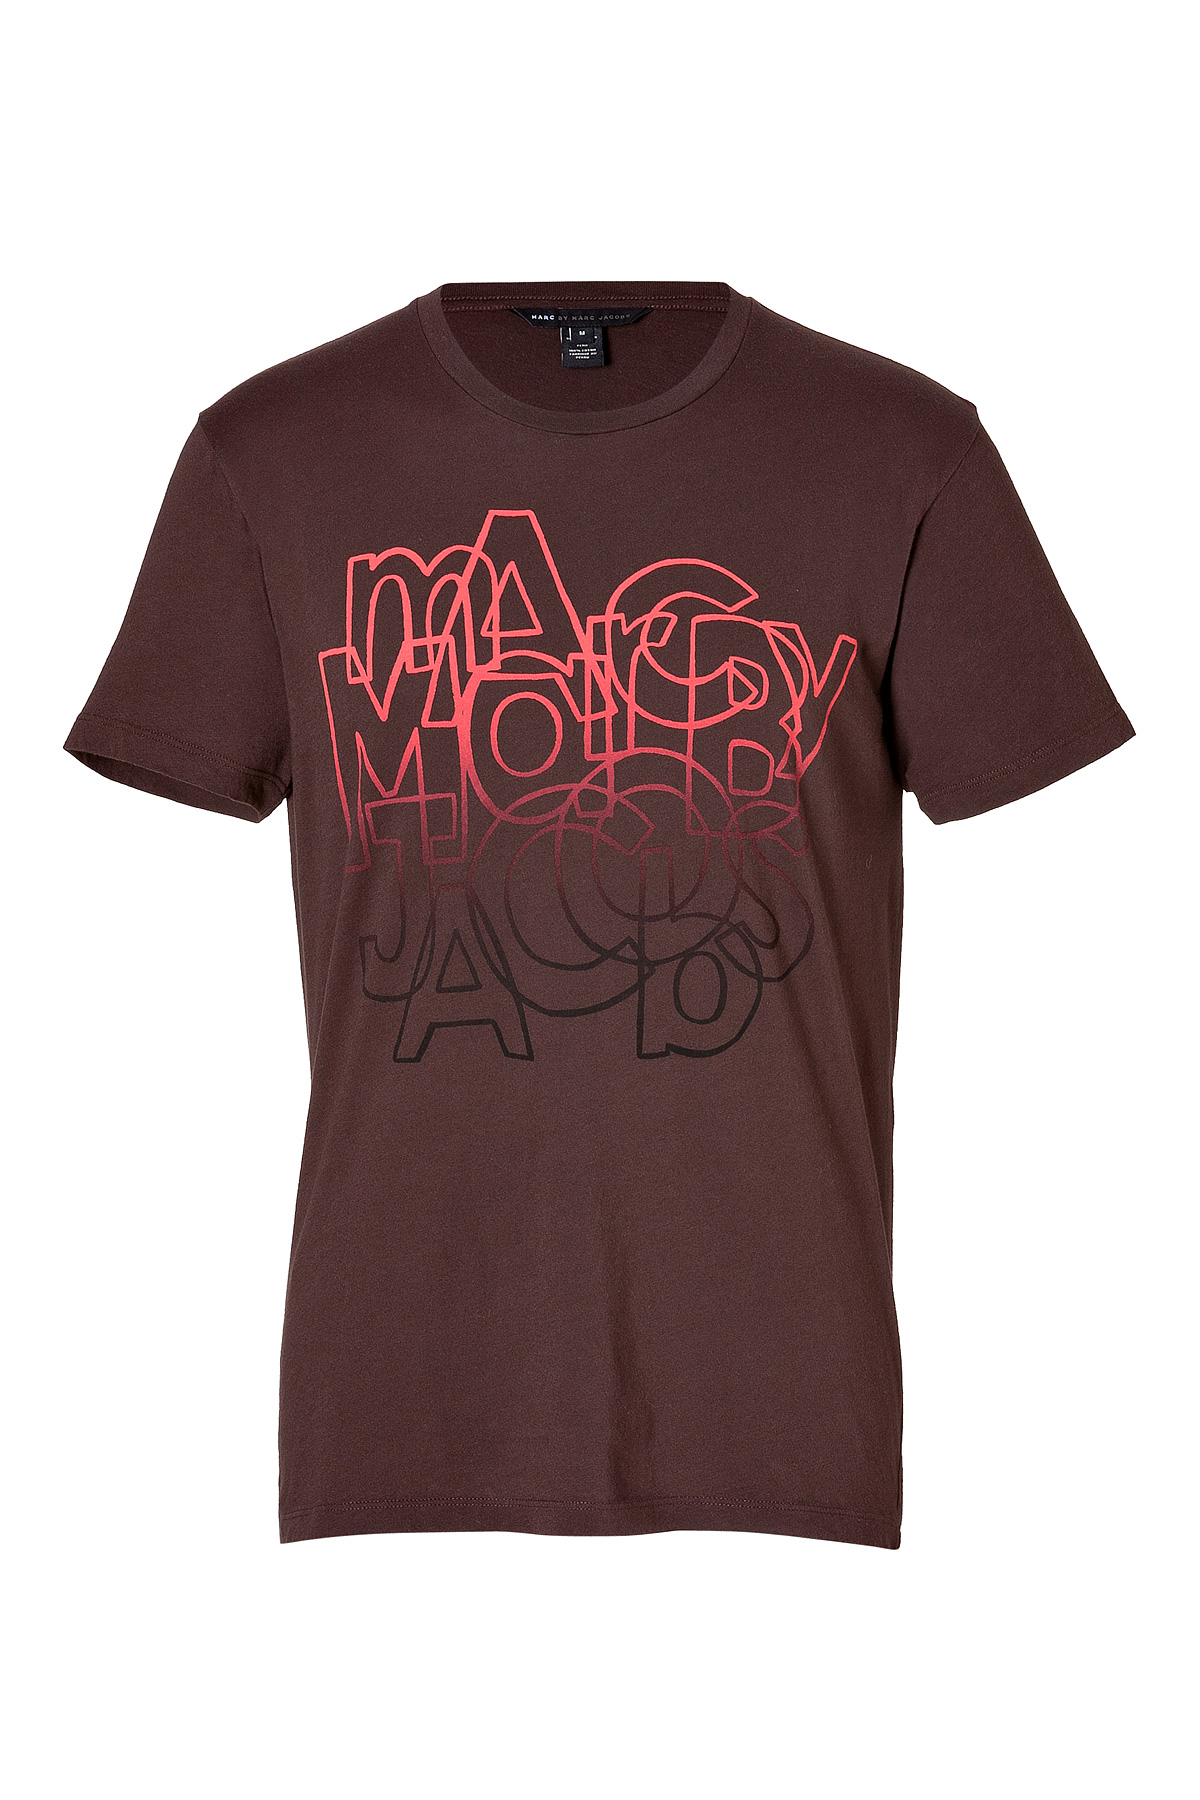 Marc By Marc Jacobs Faded Font T-shirt in Brown Multi in Brown for Men ...